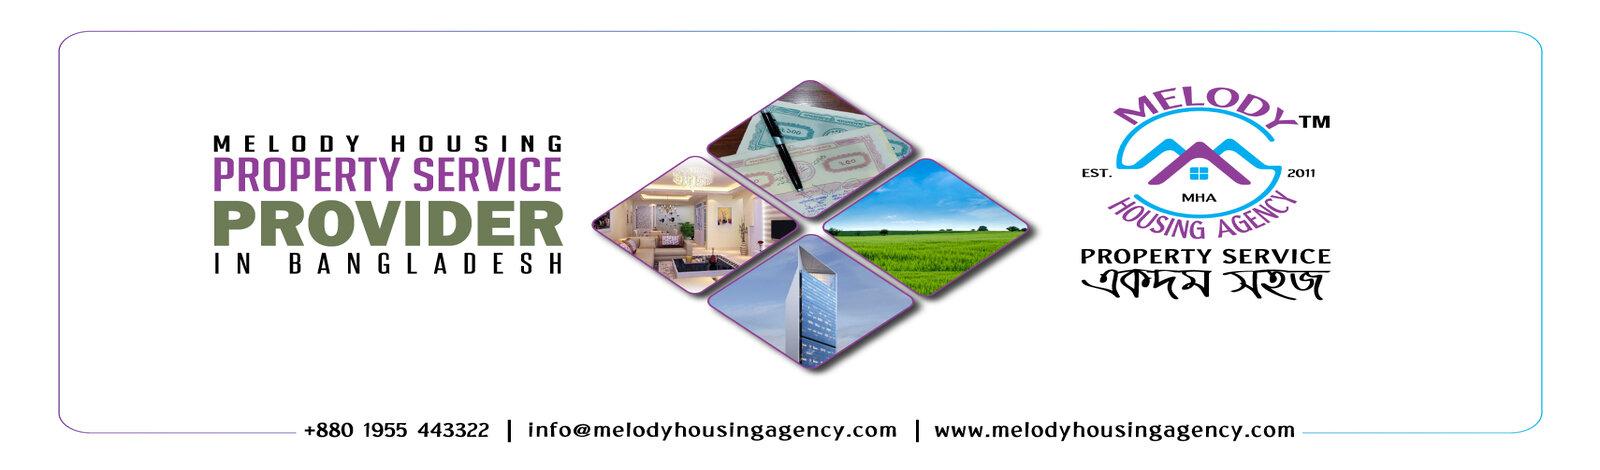 Melody Housing Agency banner